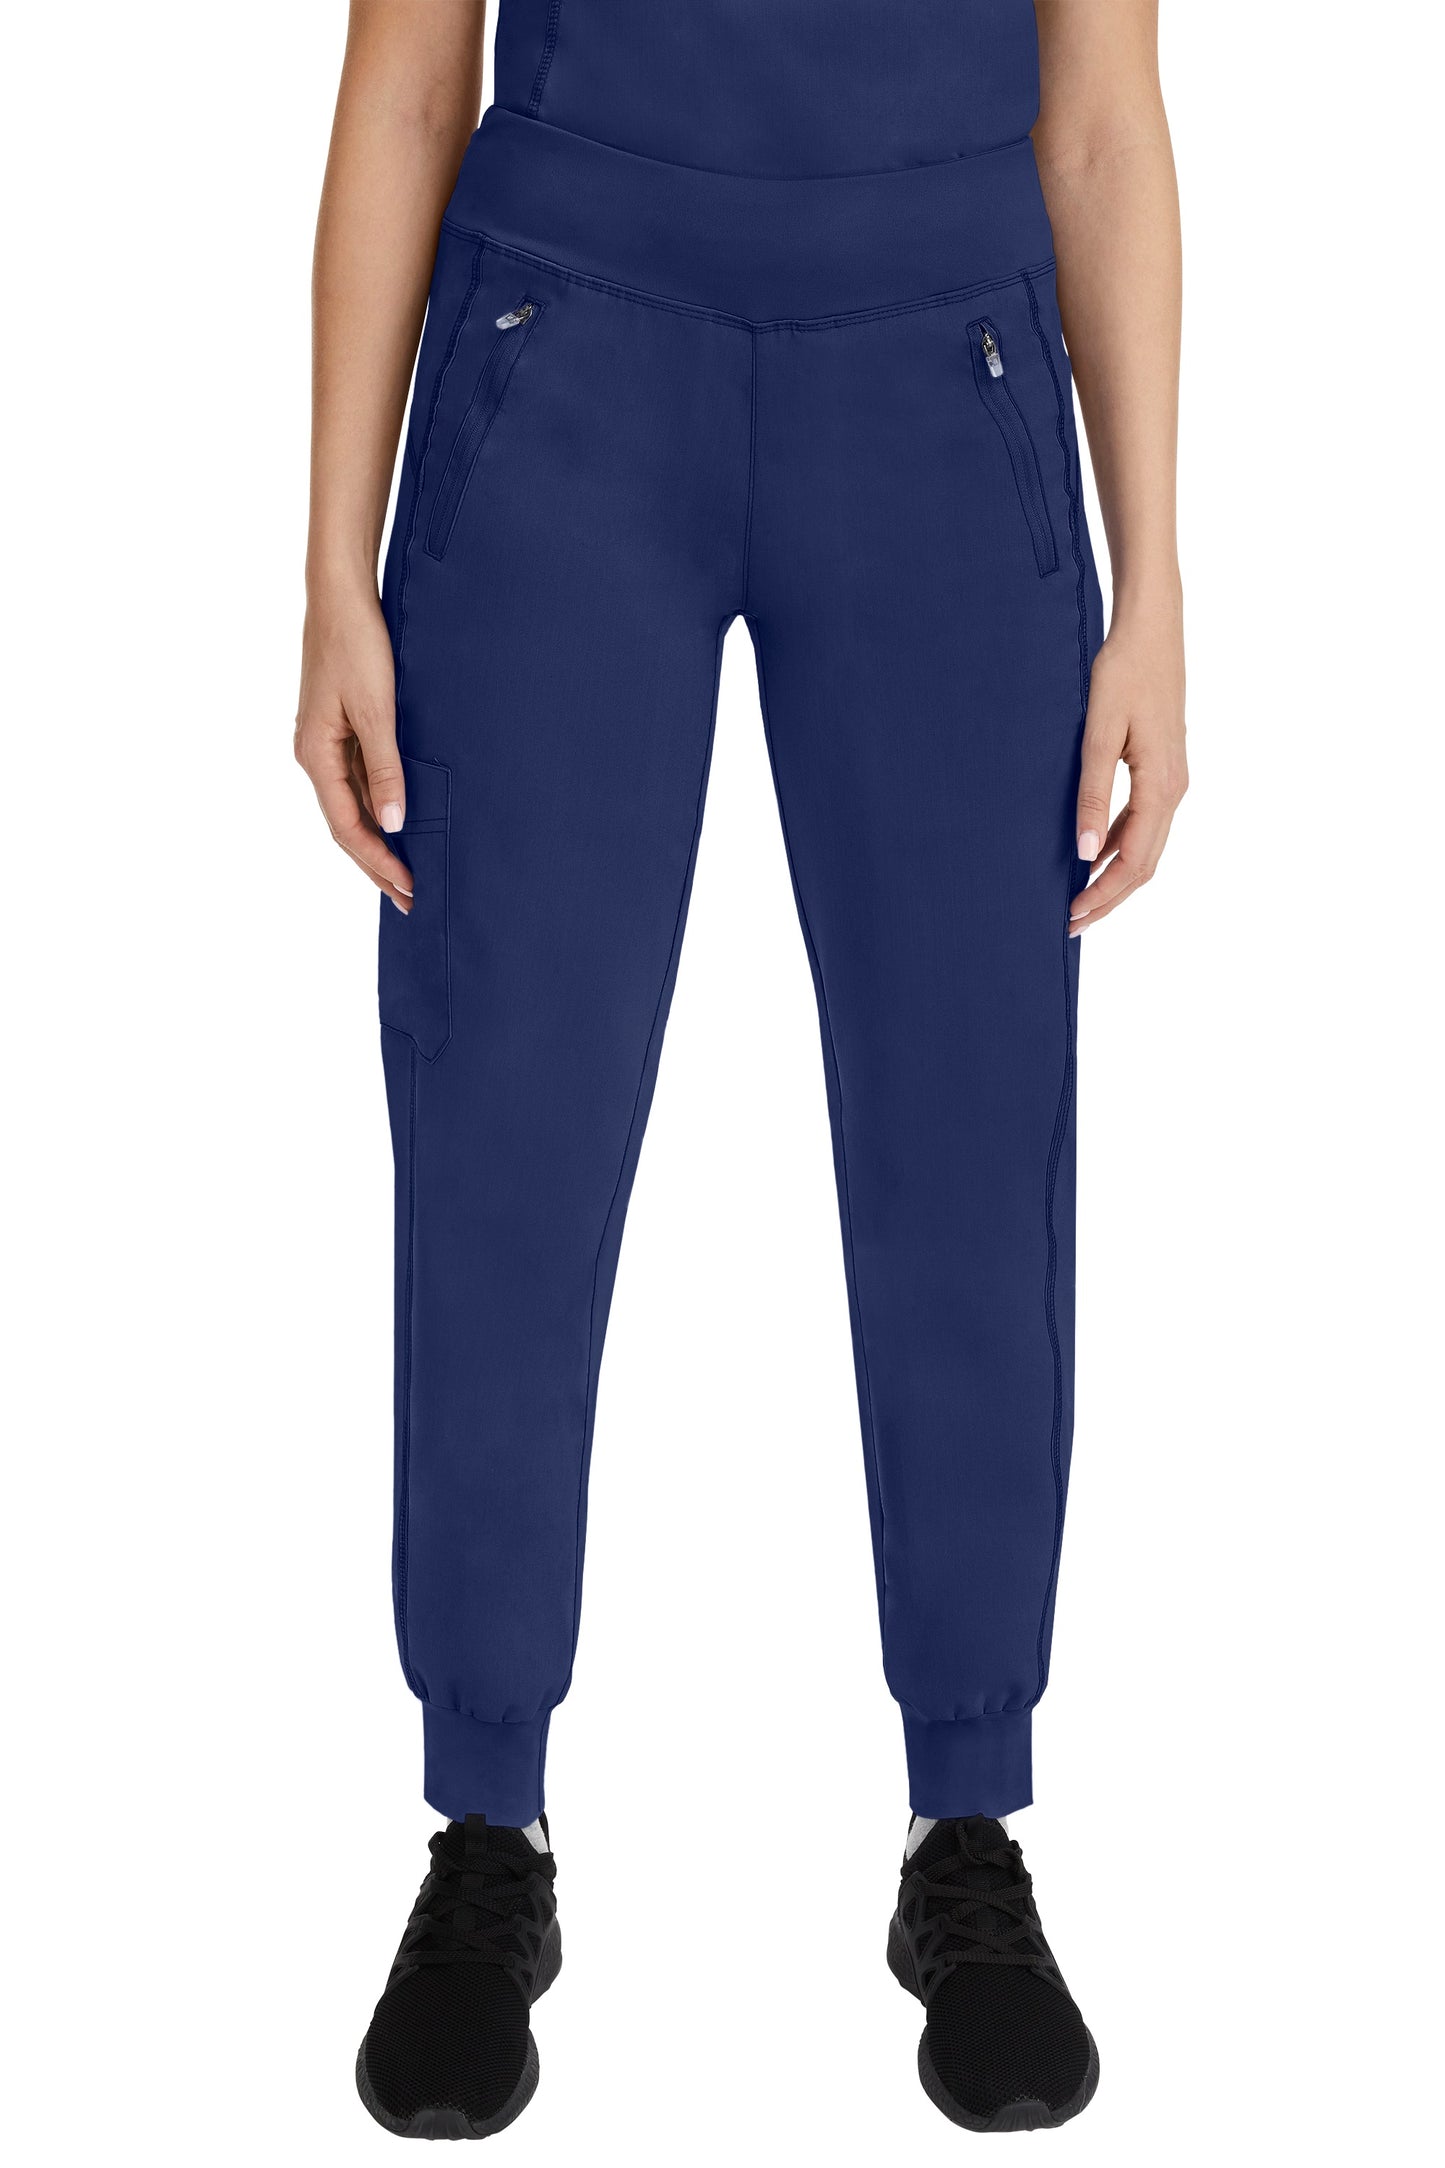 Healing Hands Purple Label Yoga Tara Jogger Petite Scrub Pant in Navy at Parker's Clothing and Shoes.